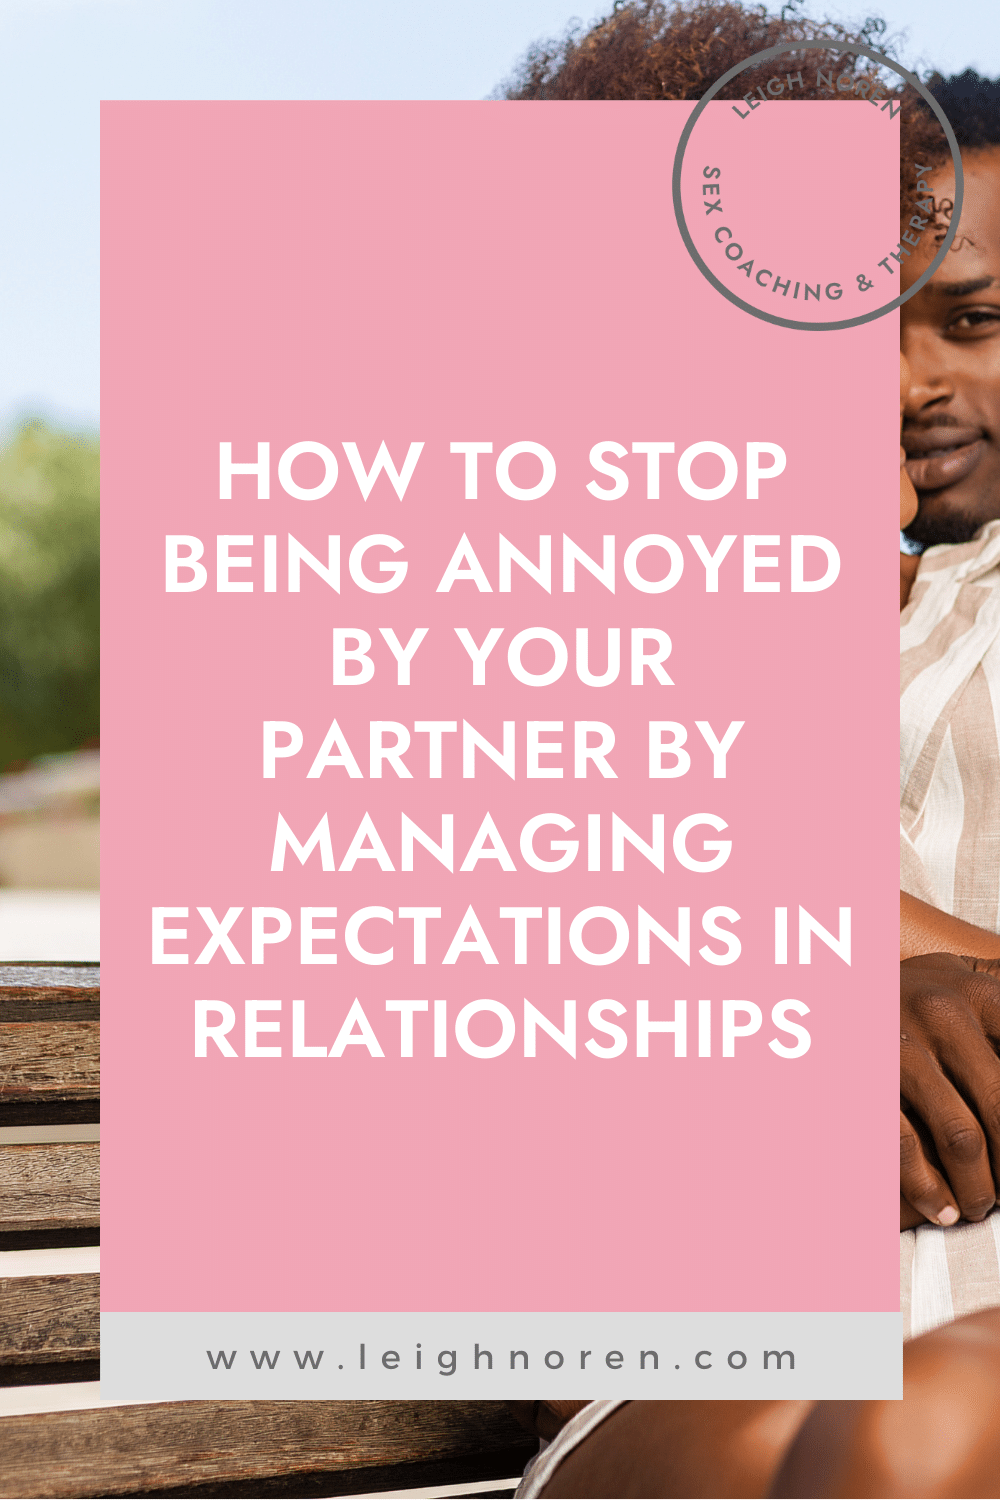 How to Stop Being Annoyed By Your Partner by Managing Expectations in Relationships